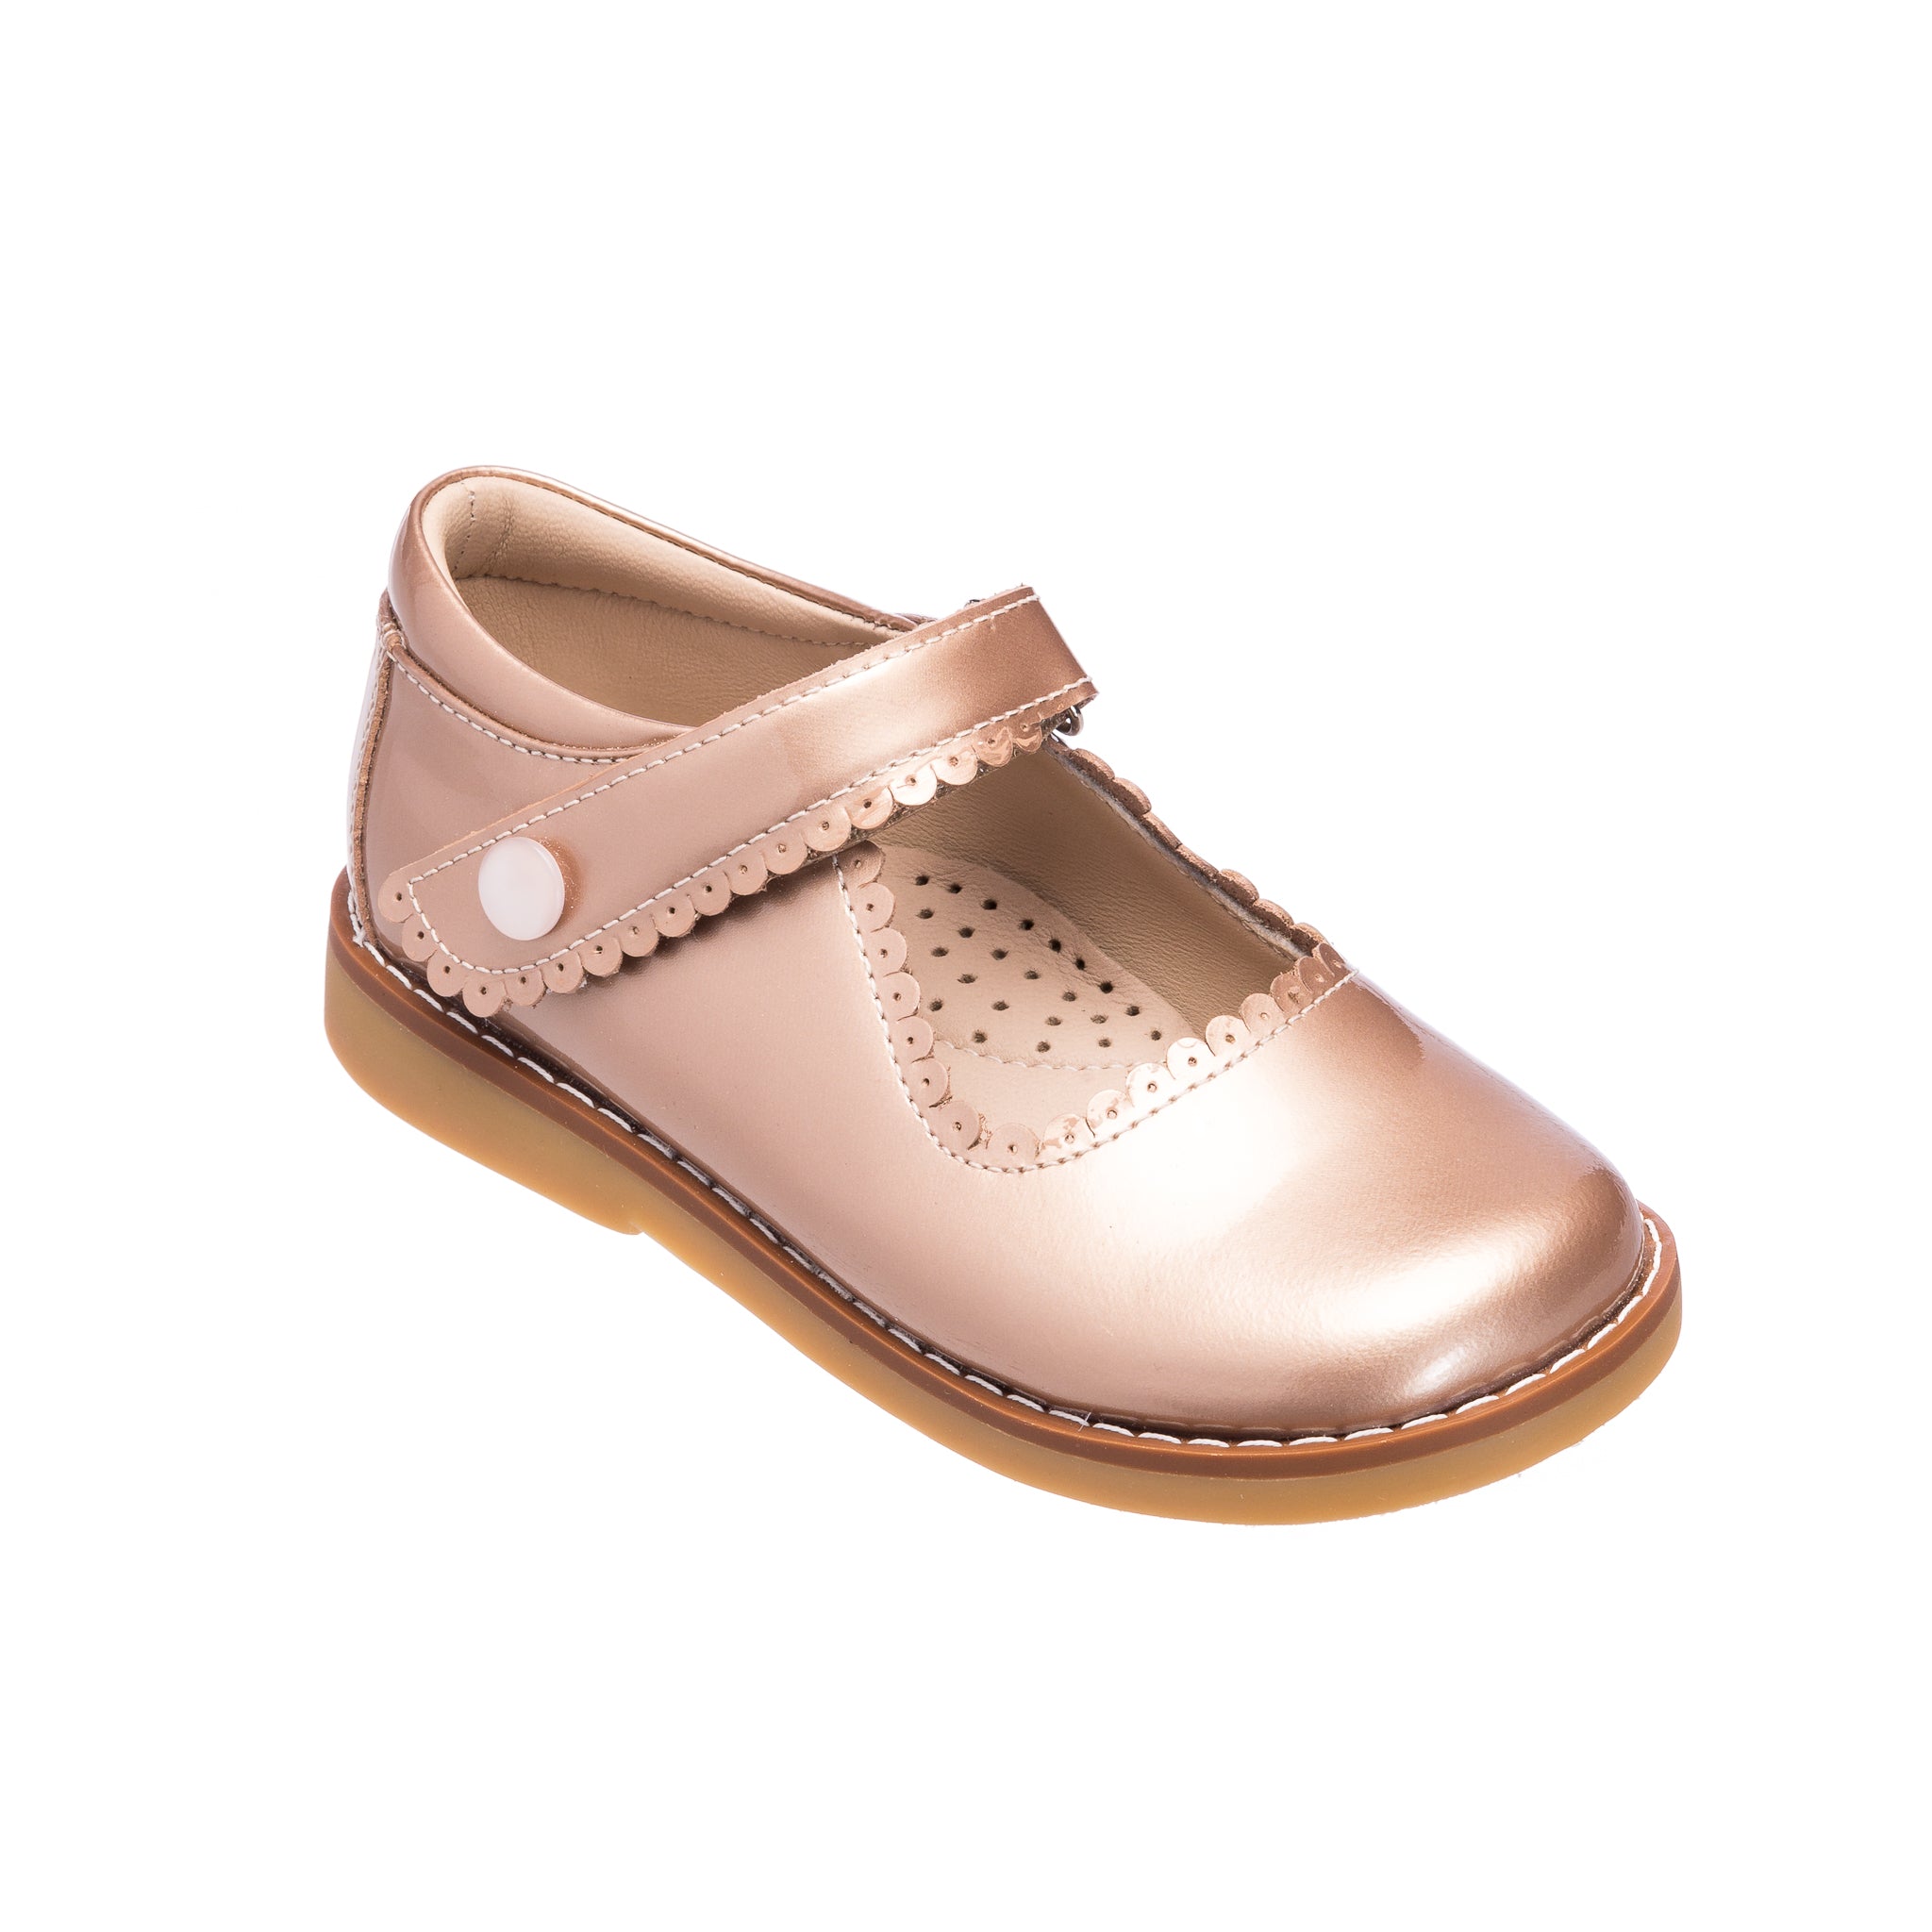 rose gold mary janes